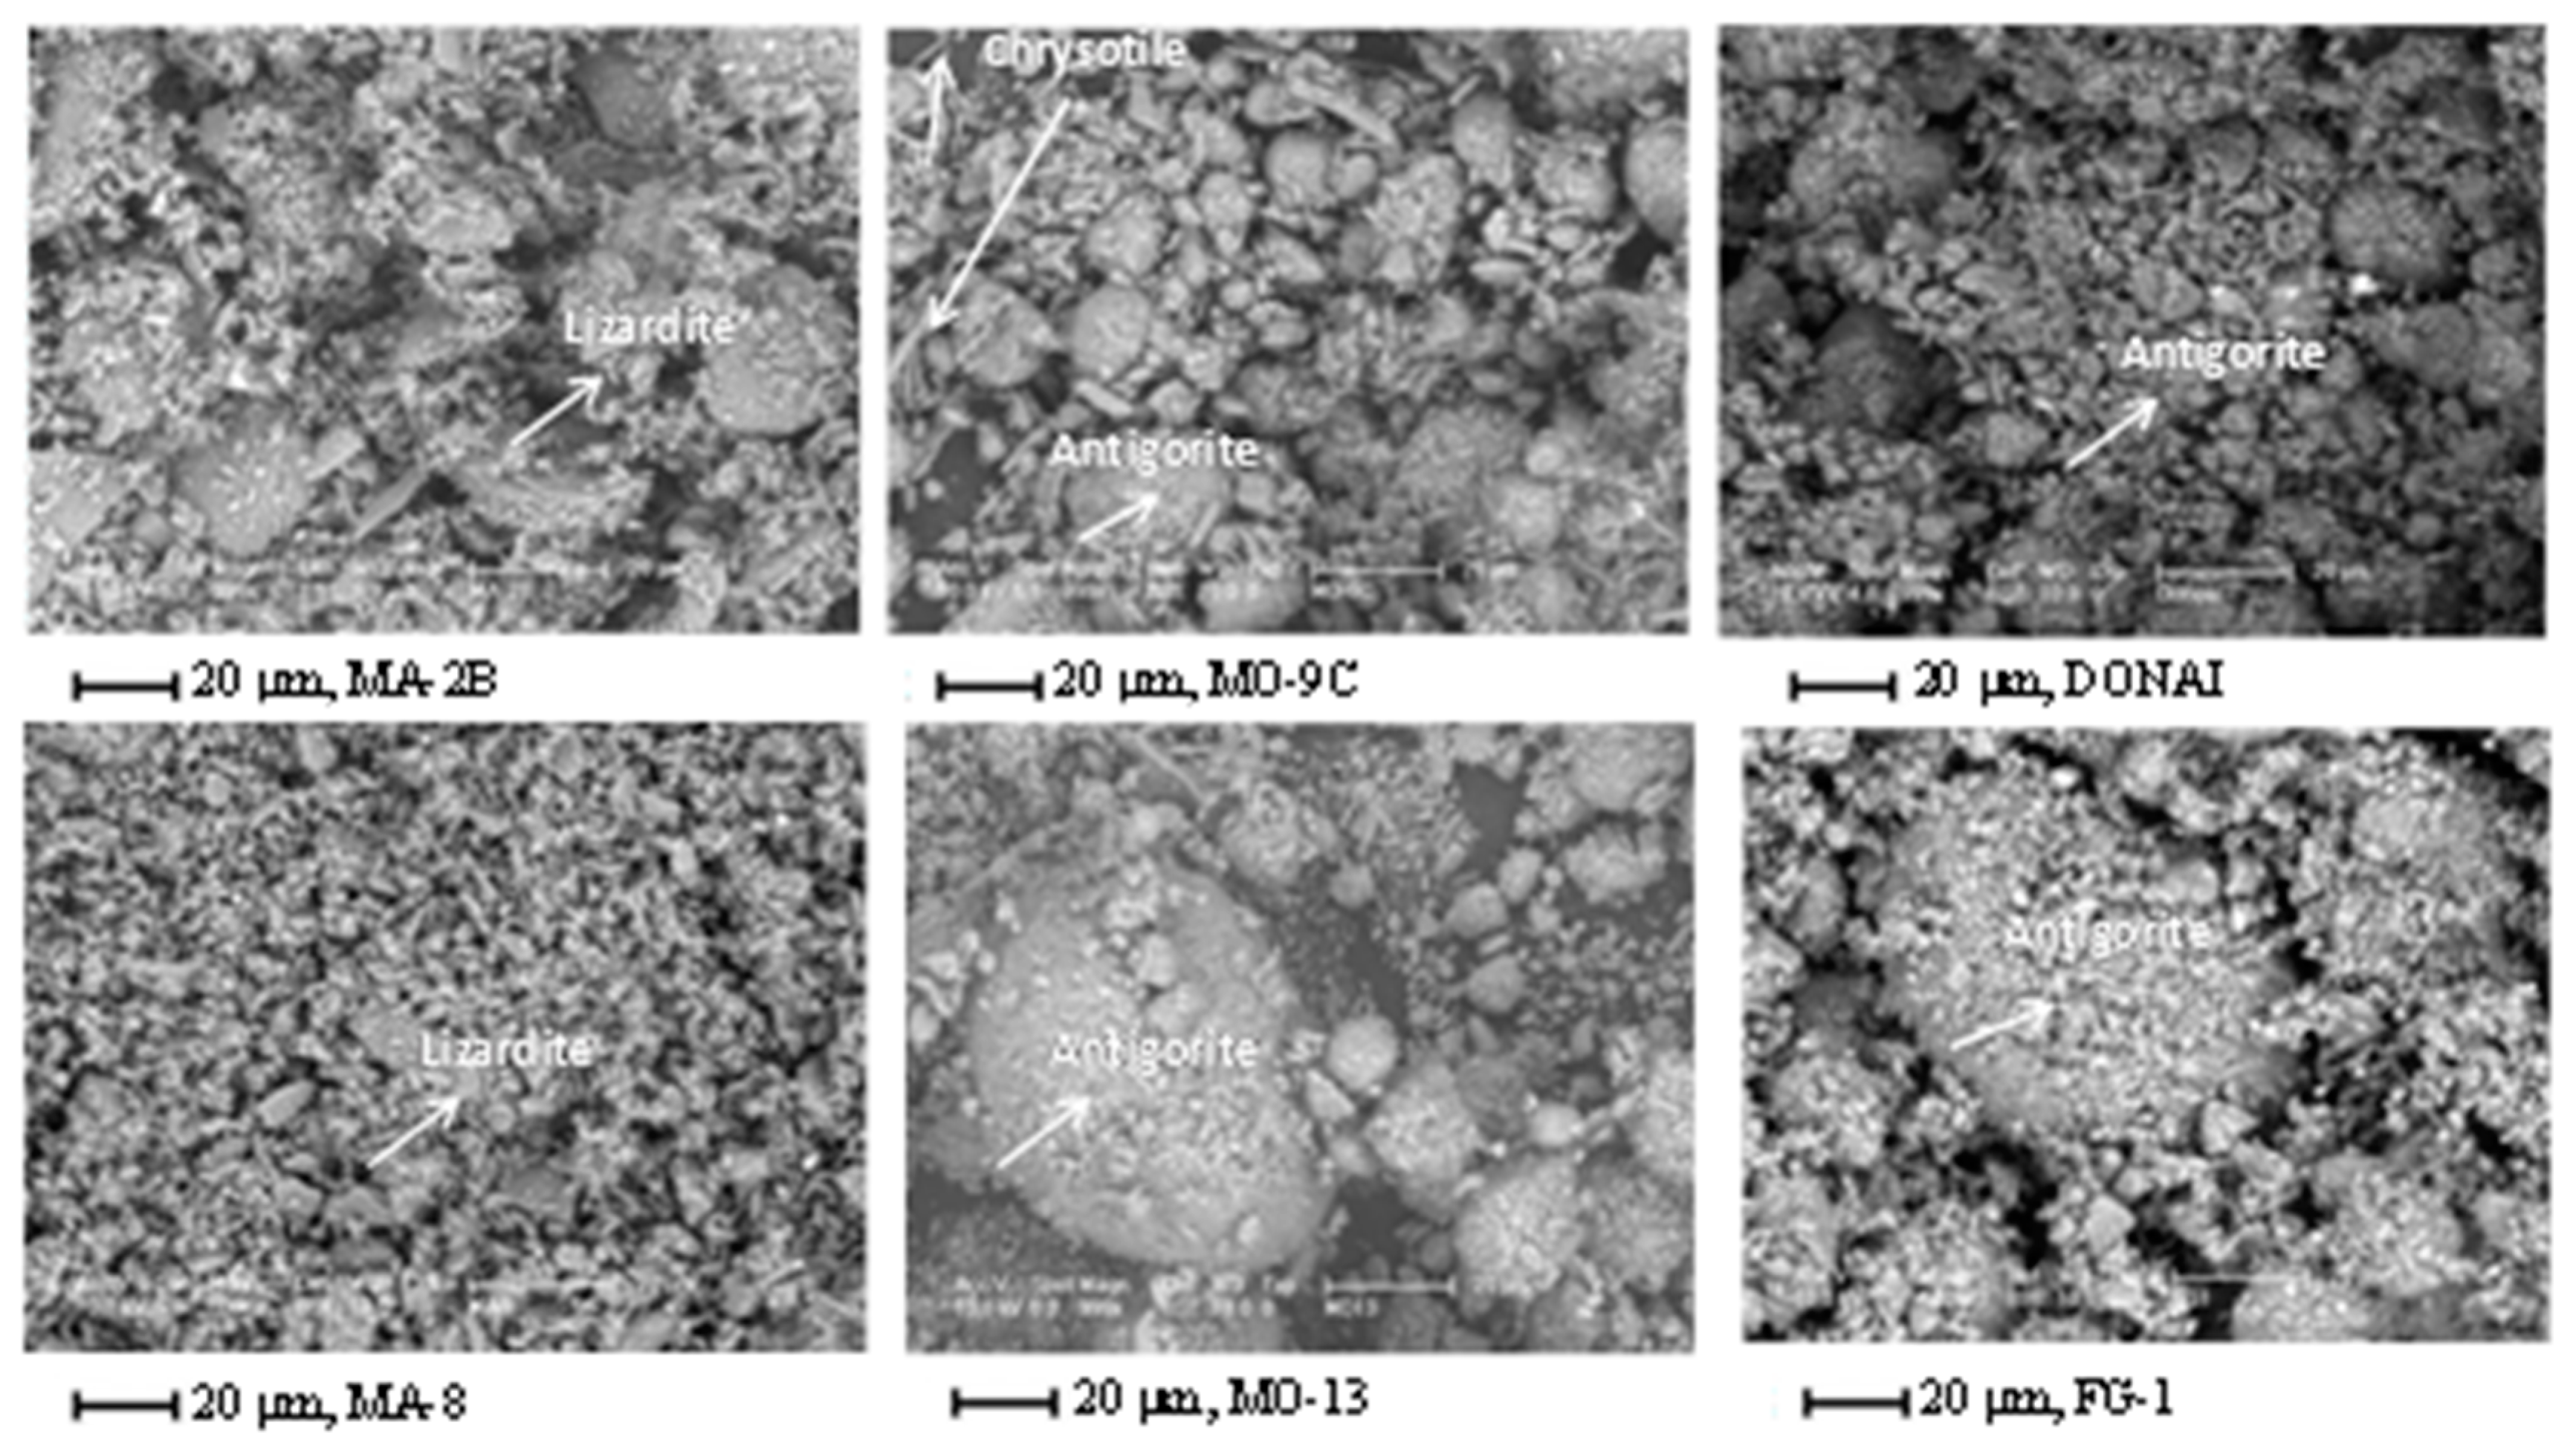 Fibers | Free Full-Text | Characterization of Serpentines from Different  Regions by Transmission Electron Microscopy, X-ray Diffraction, BET  Specific Surface Area and Vibrational and Electronic Spectroscopy | HTML